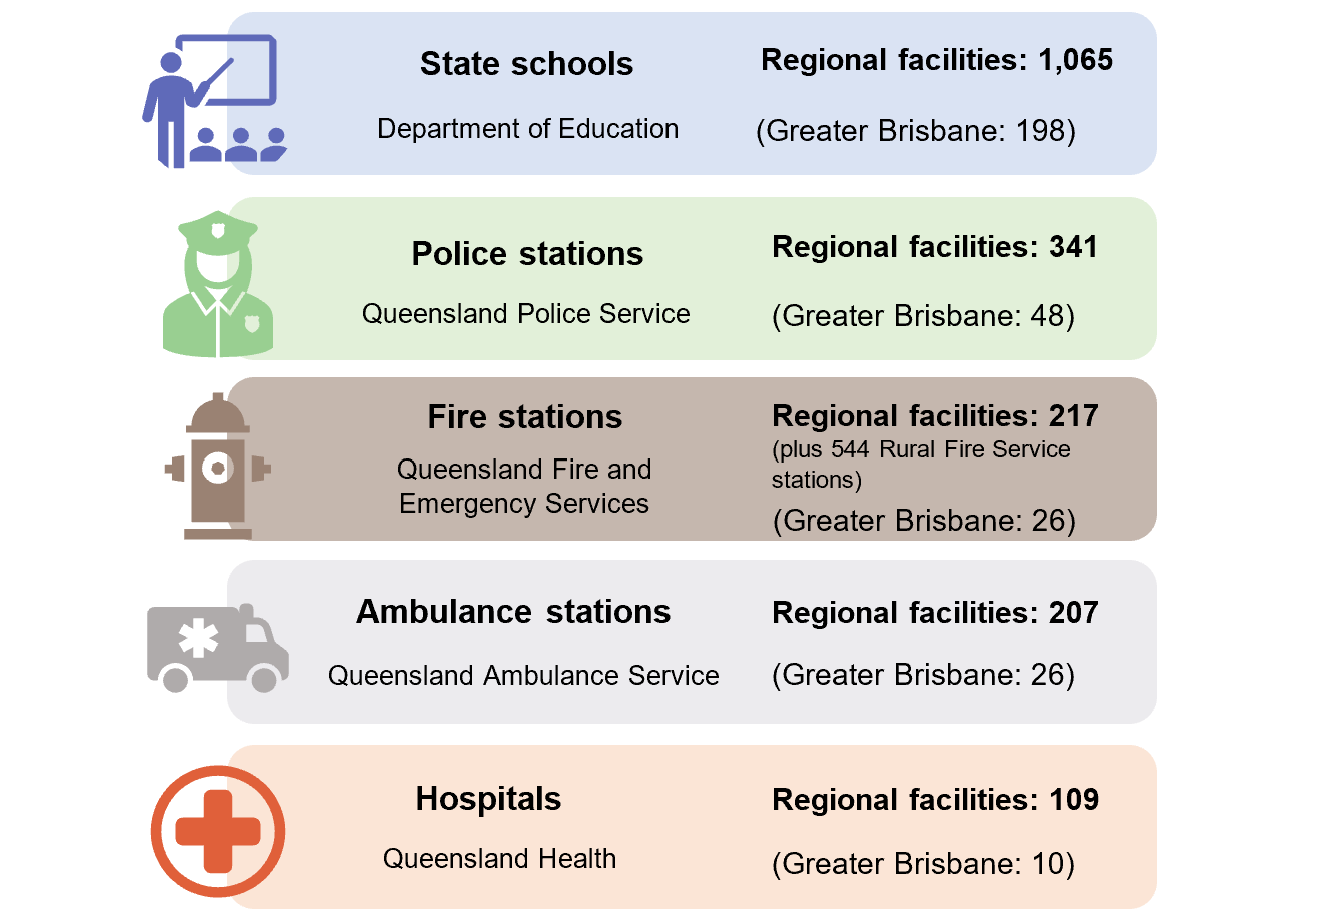 Graphic of number of facilities for frontline service entities with a significant regional presence